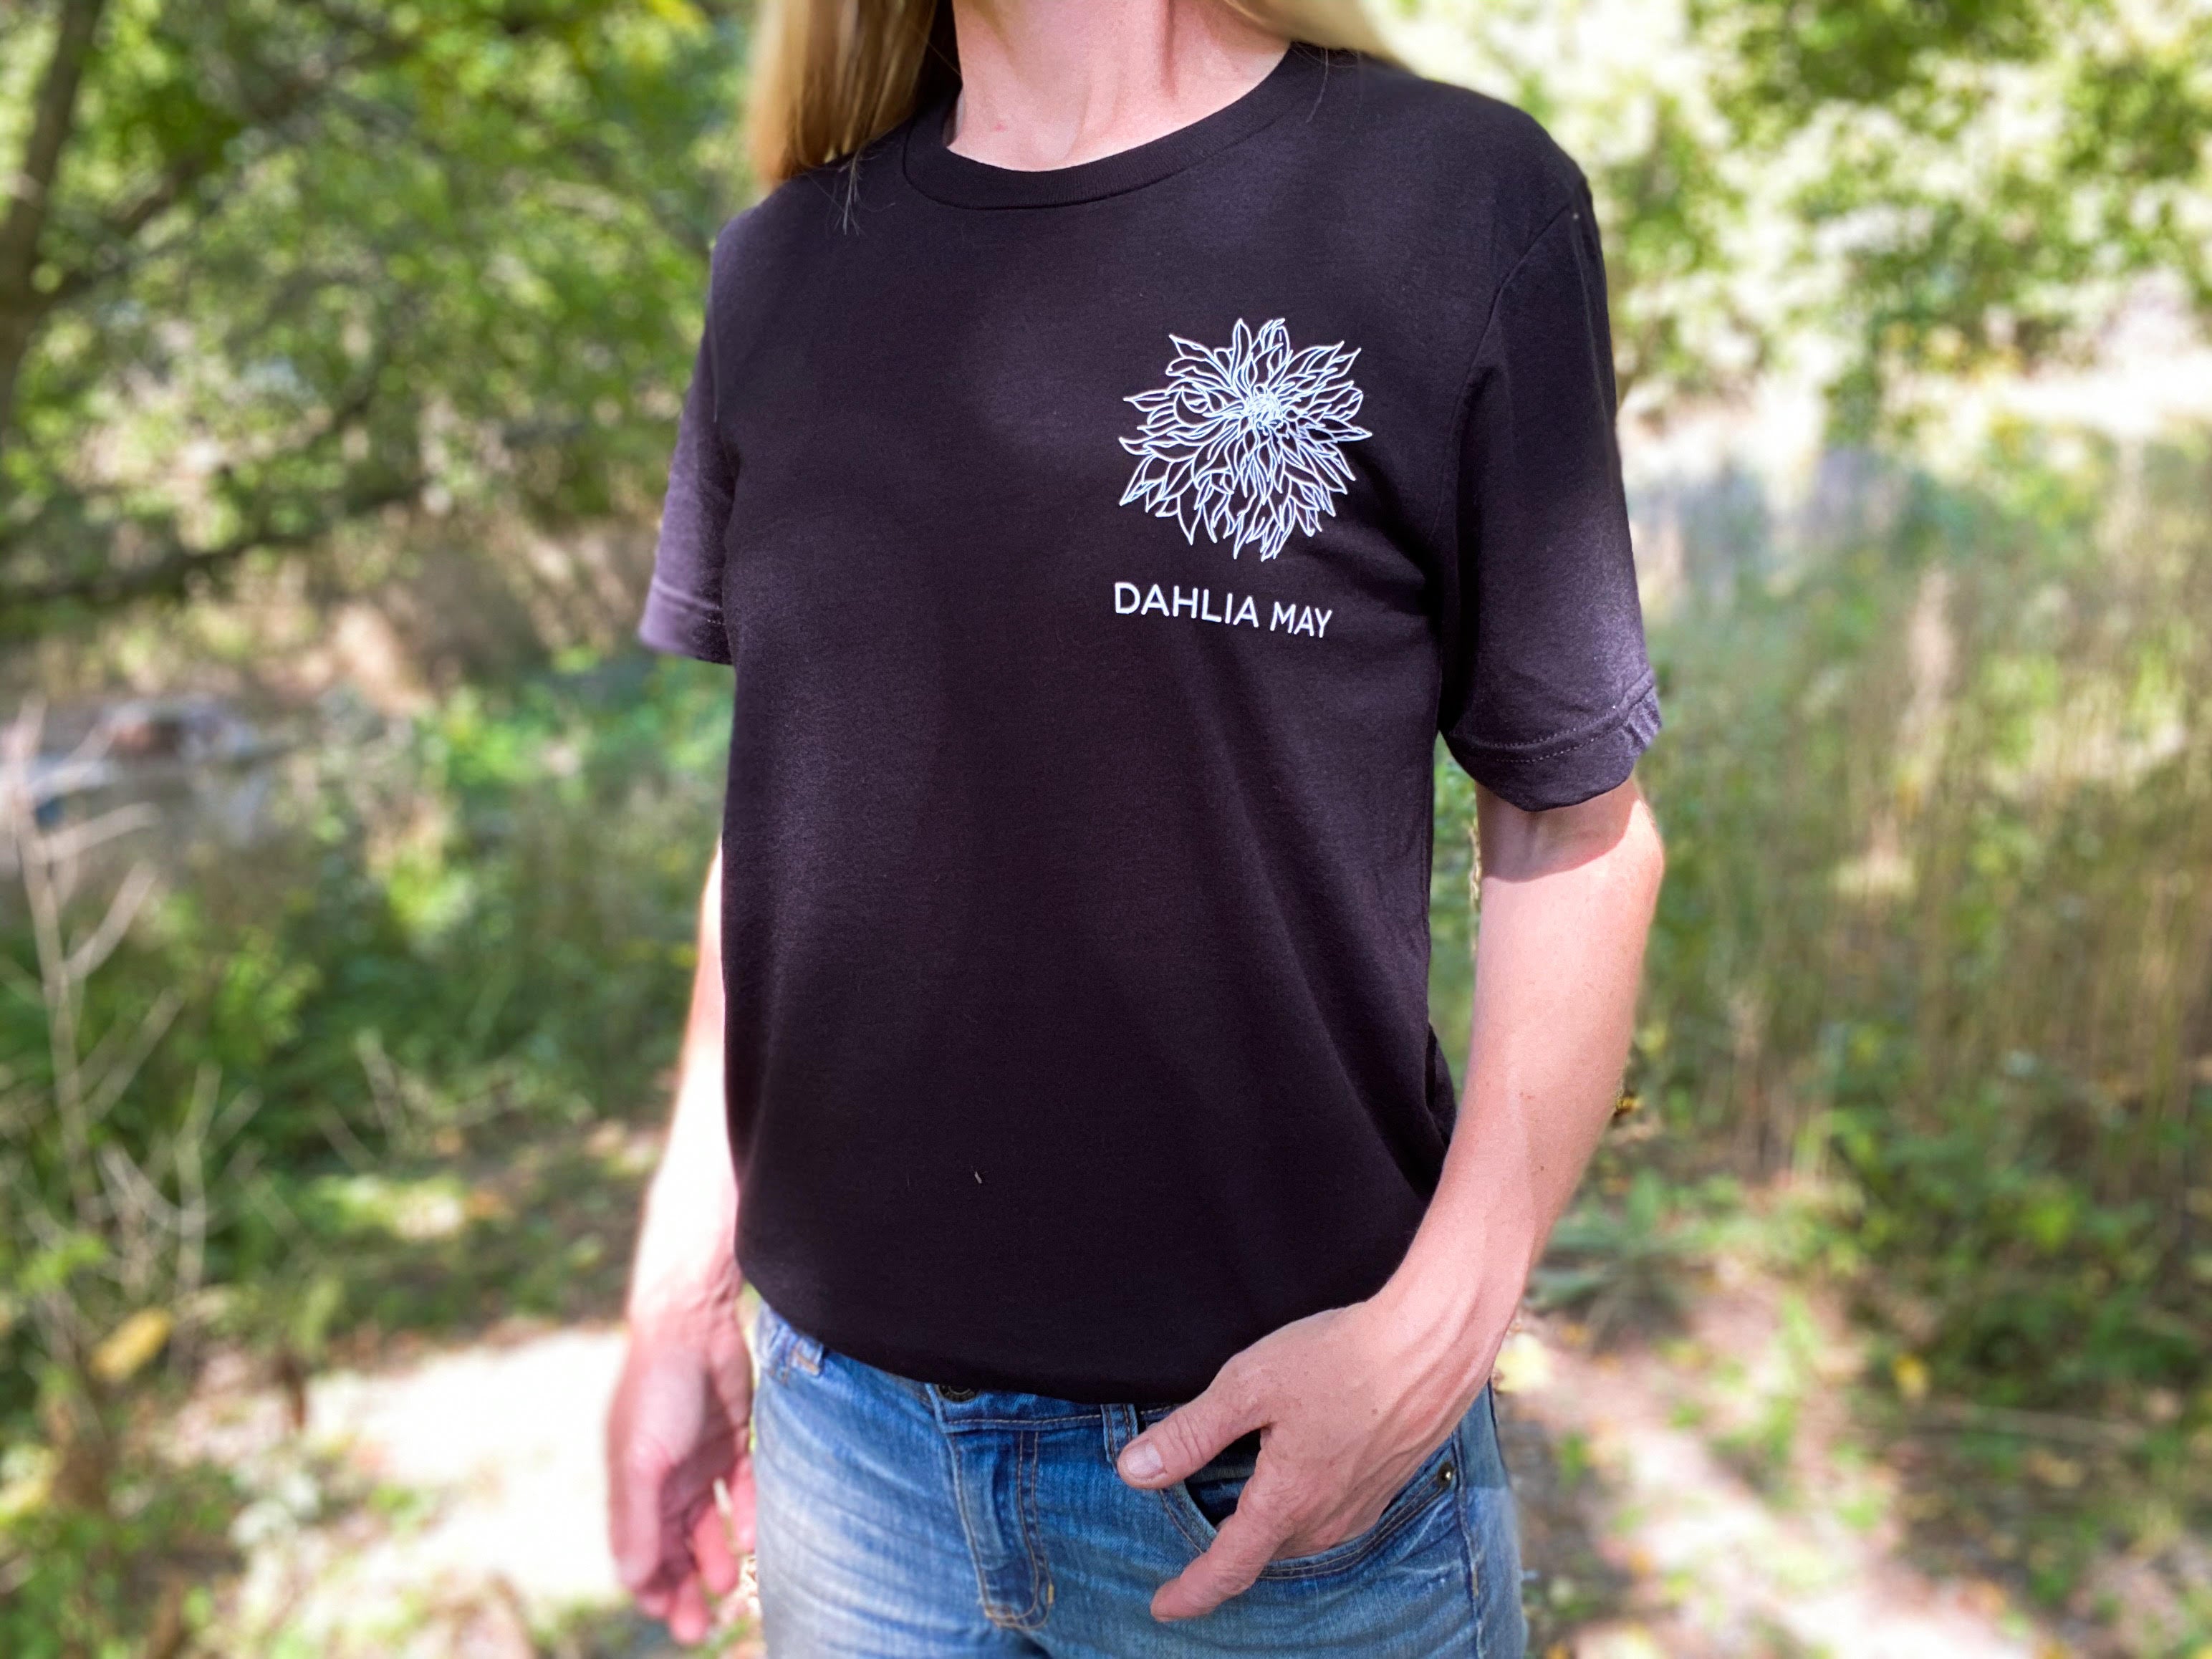 Front of t-shirt with Dahlia May logo